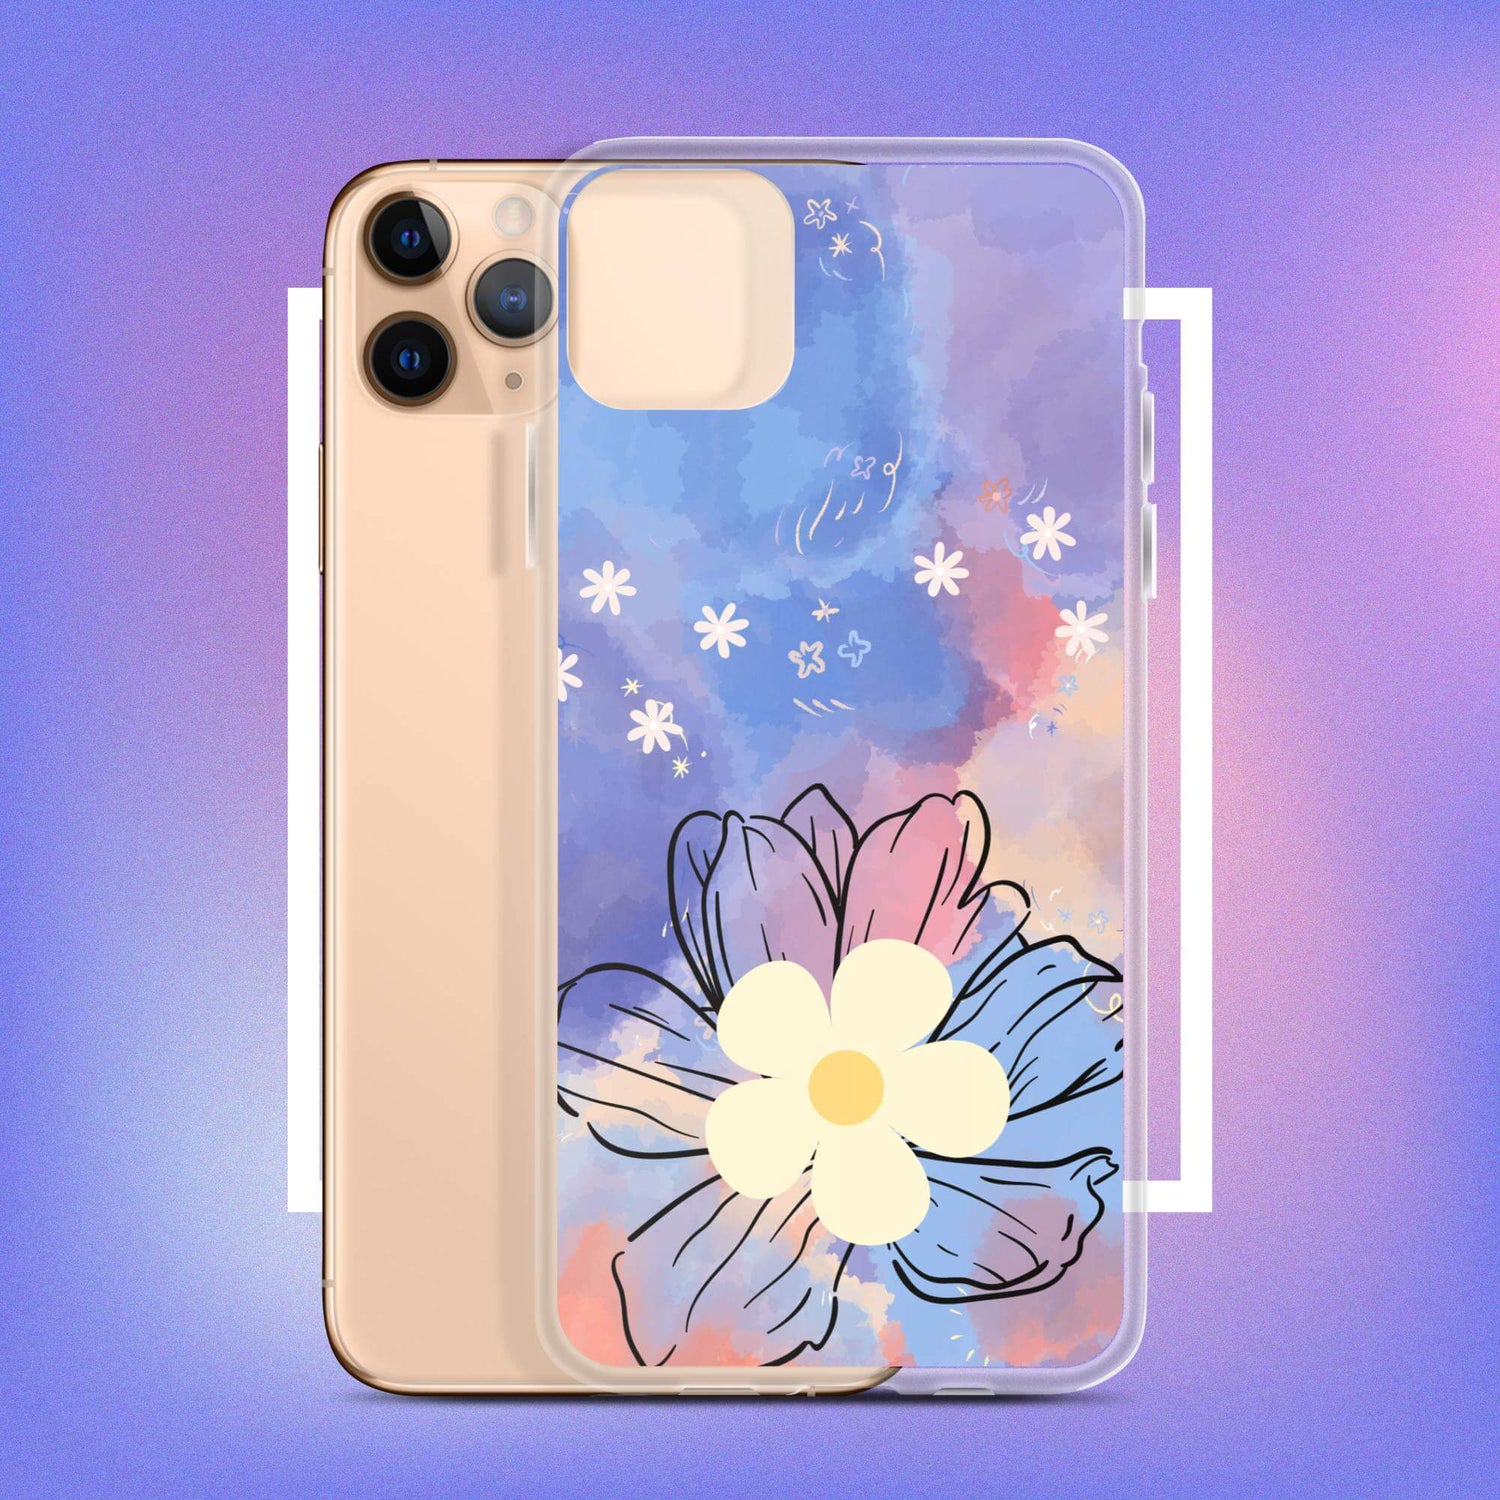 The Flower Galaxy - Iphone Case